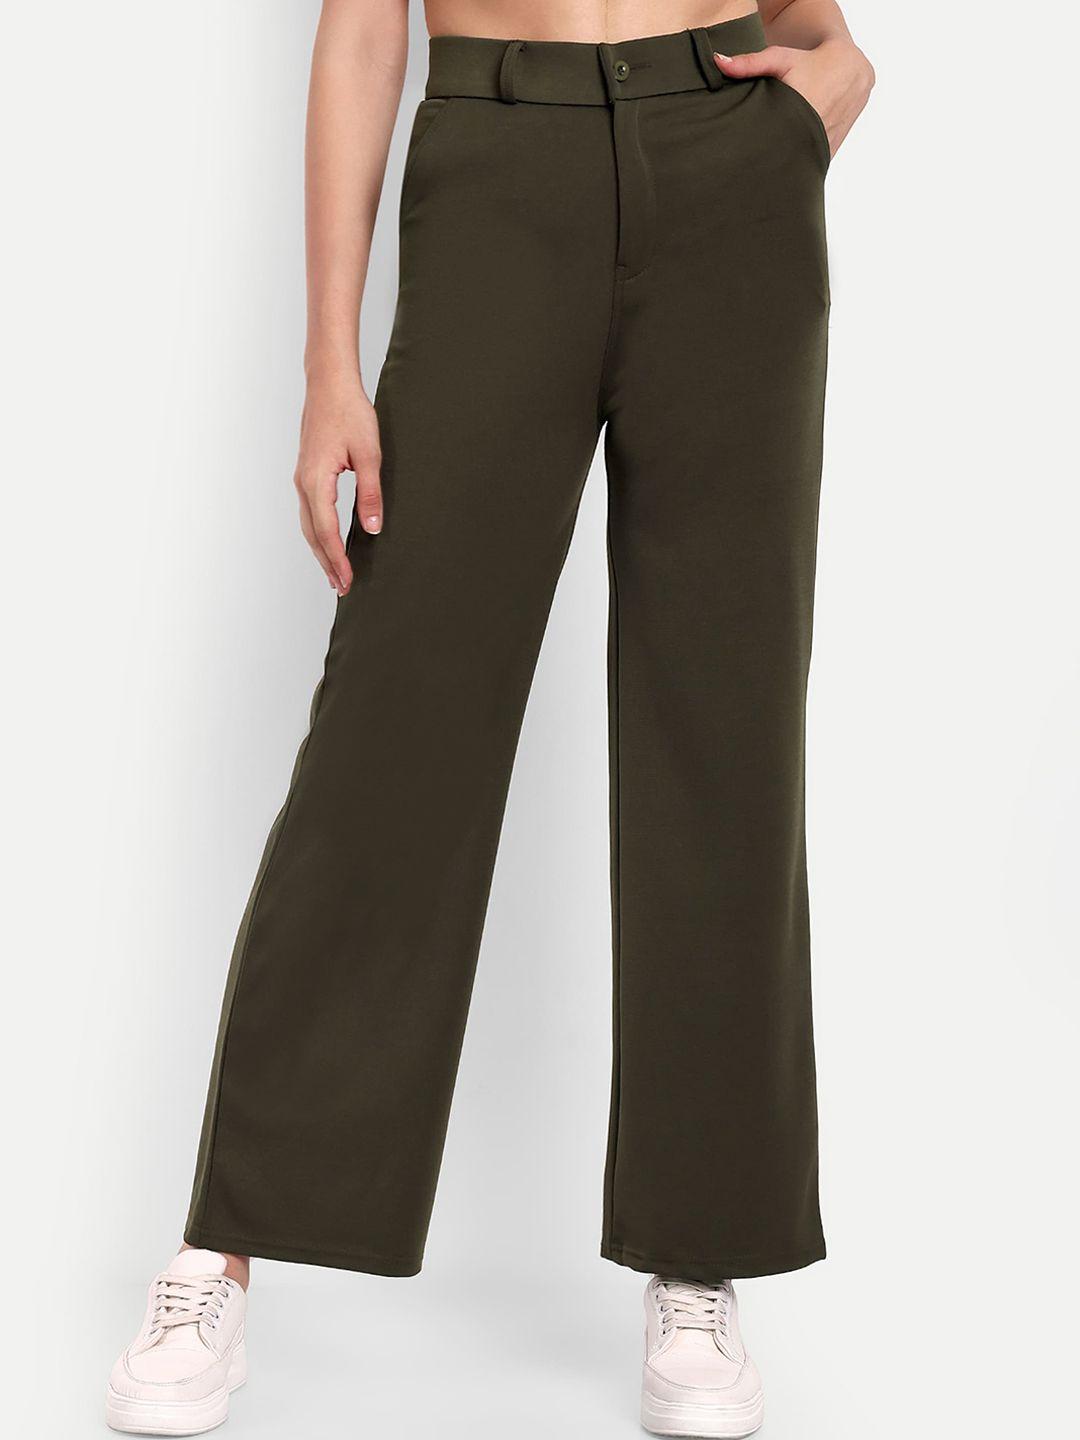 next-one-women-olive-green-smart-loose-fit-high-rise-easy-wash-trousers